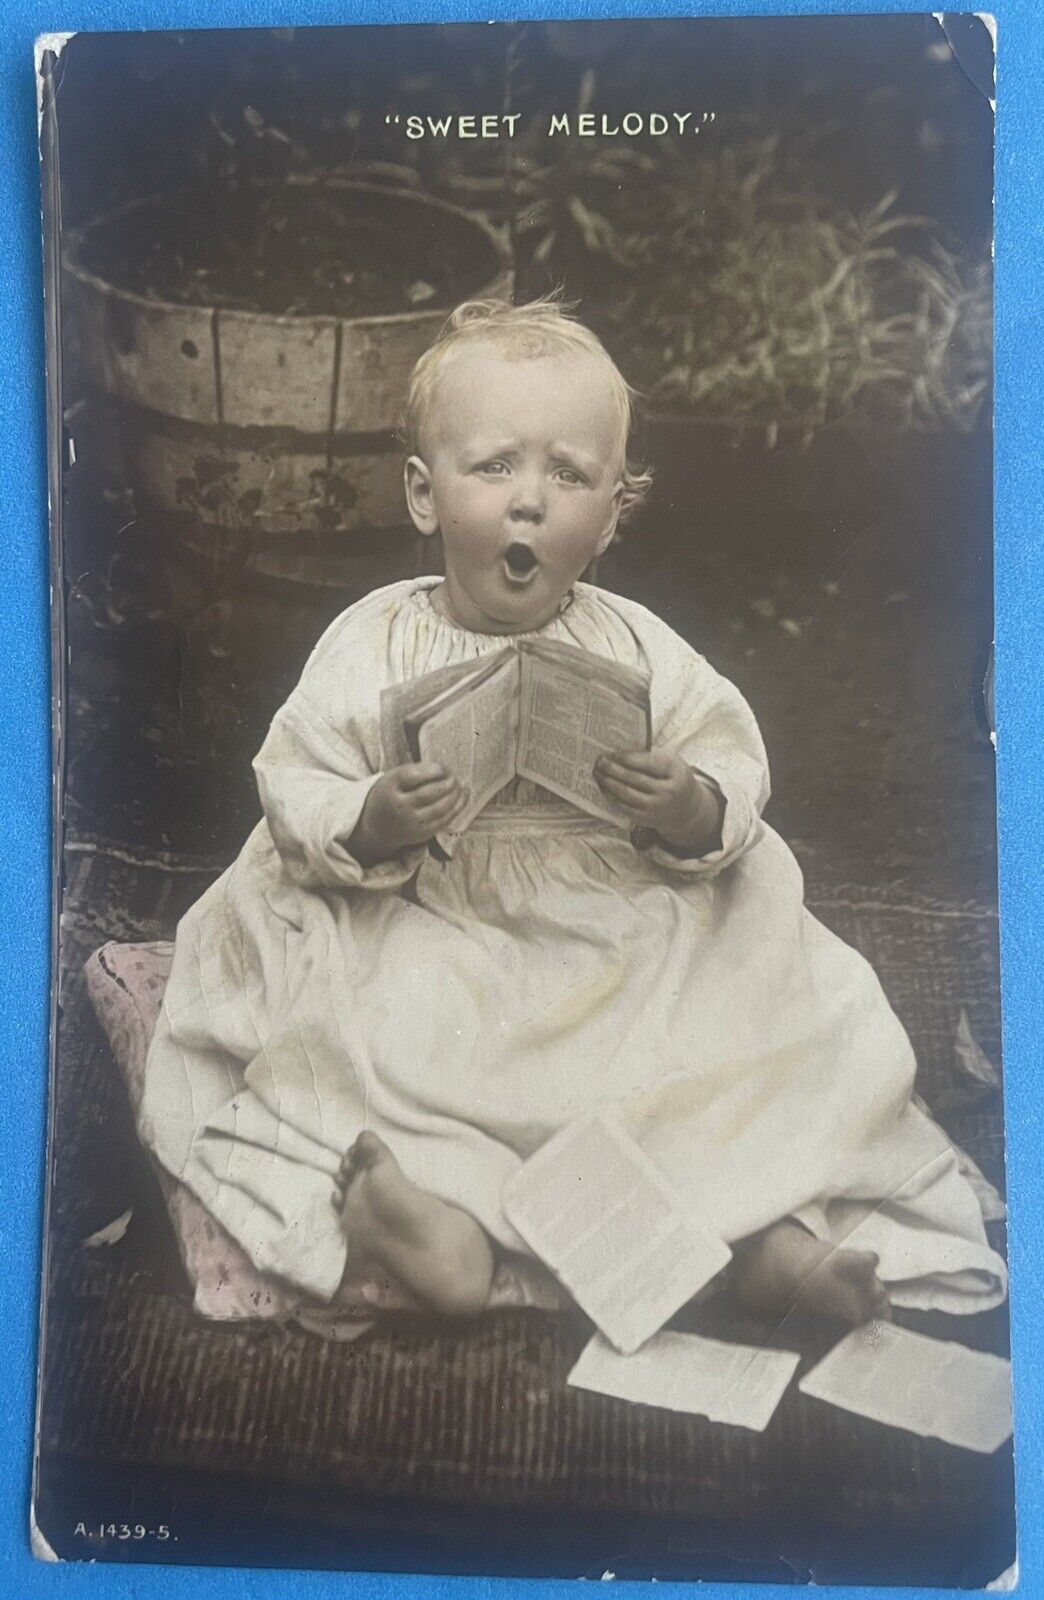 Vintage RPPC “Sweet Melody” Postcard - Singing Child, Early 1900s, Hand-Tinted